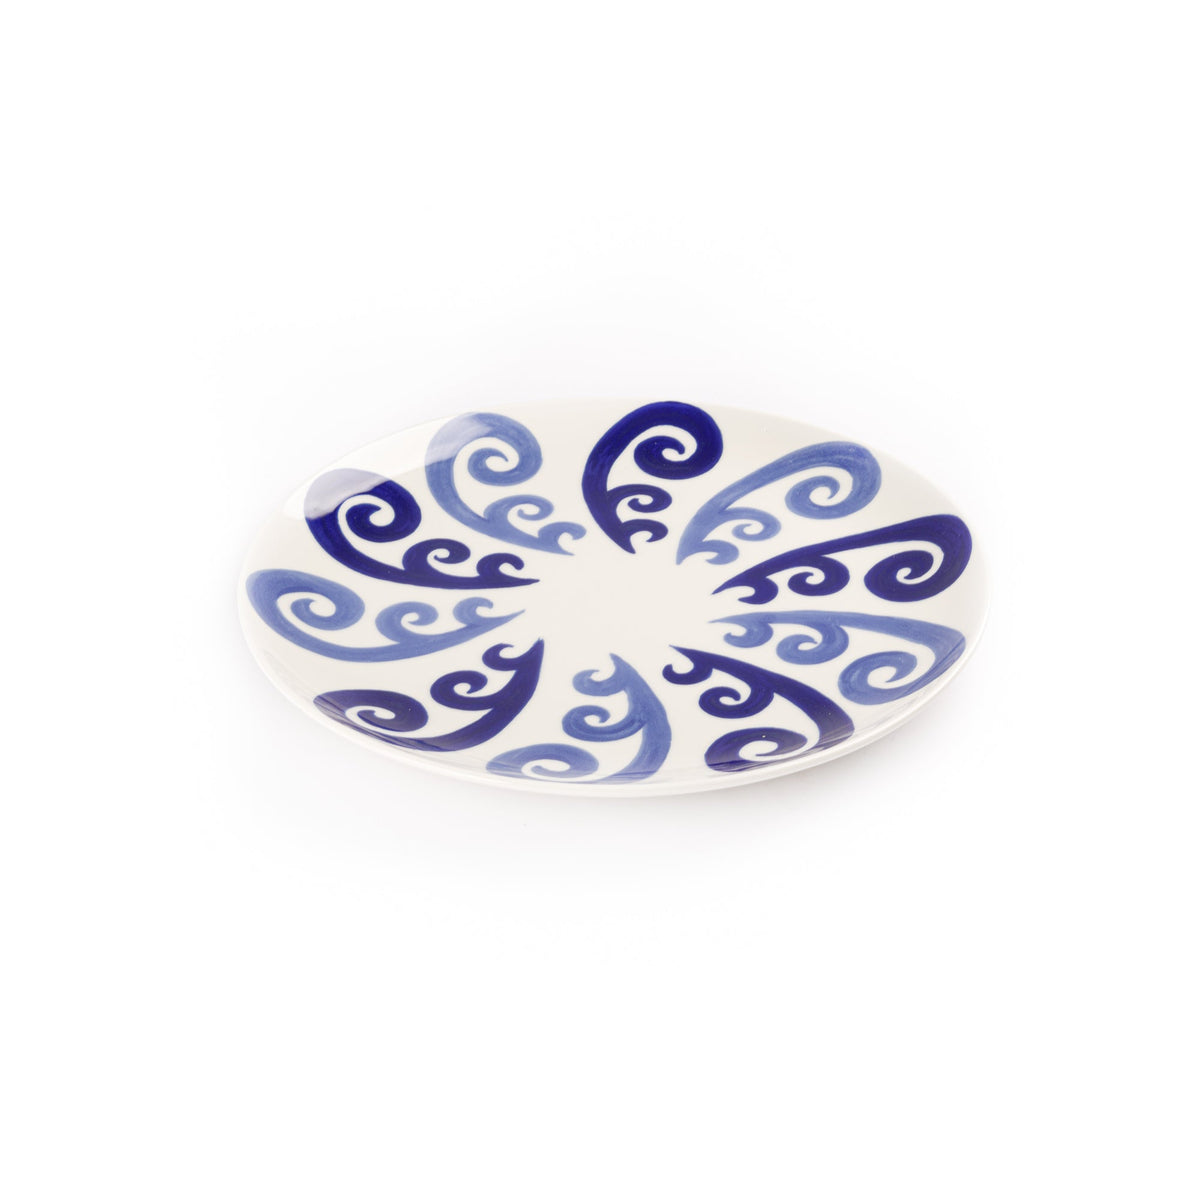 Athenee Two Tone Blue Peacock Dinner Plate